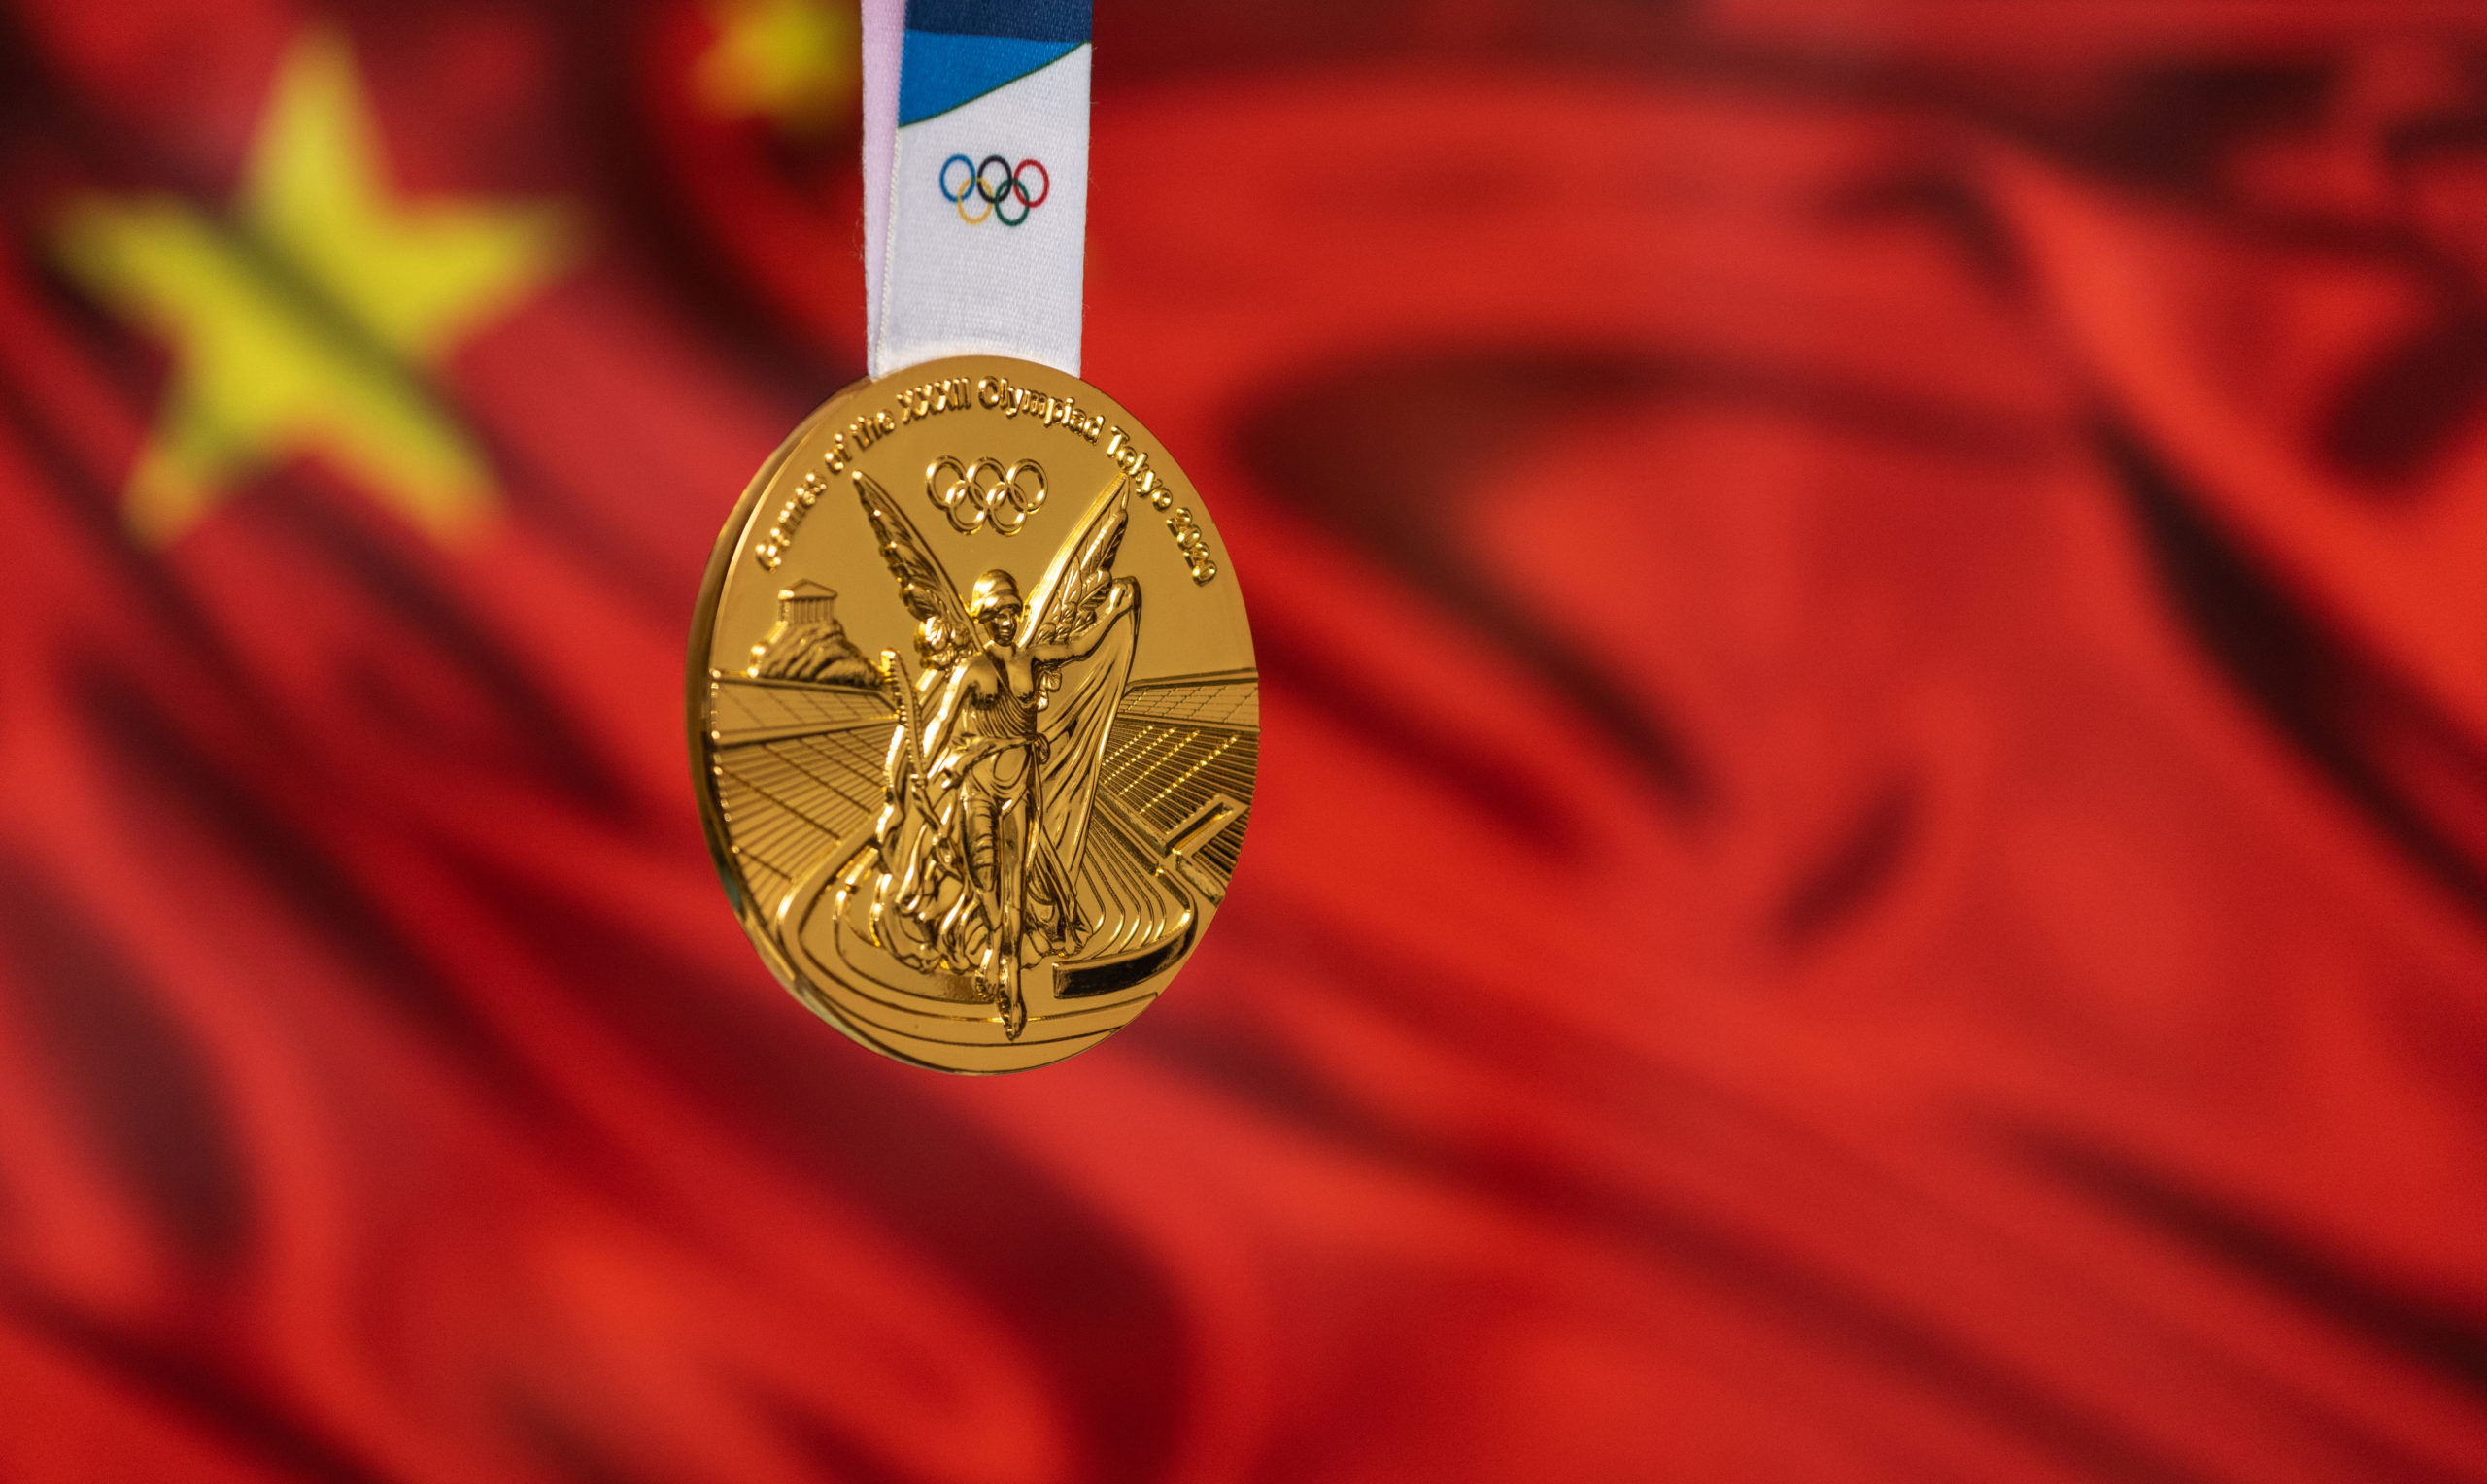 China Changes Medal Count to Unofficially Claim More Medals Than The U.S.